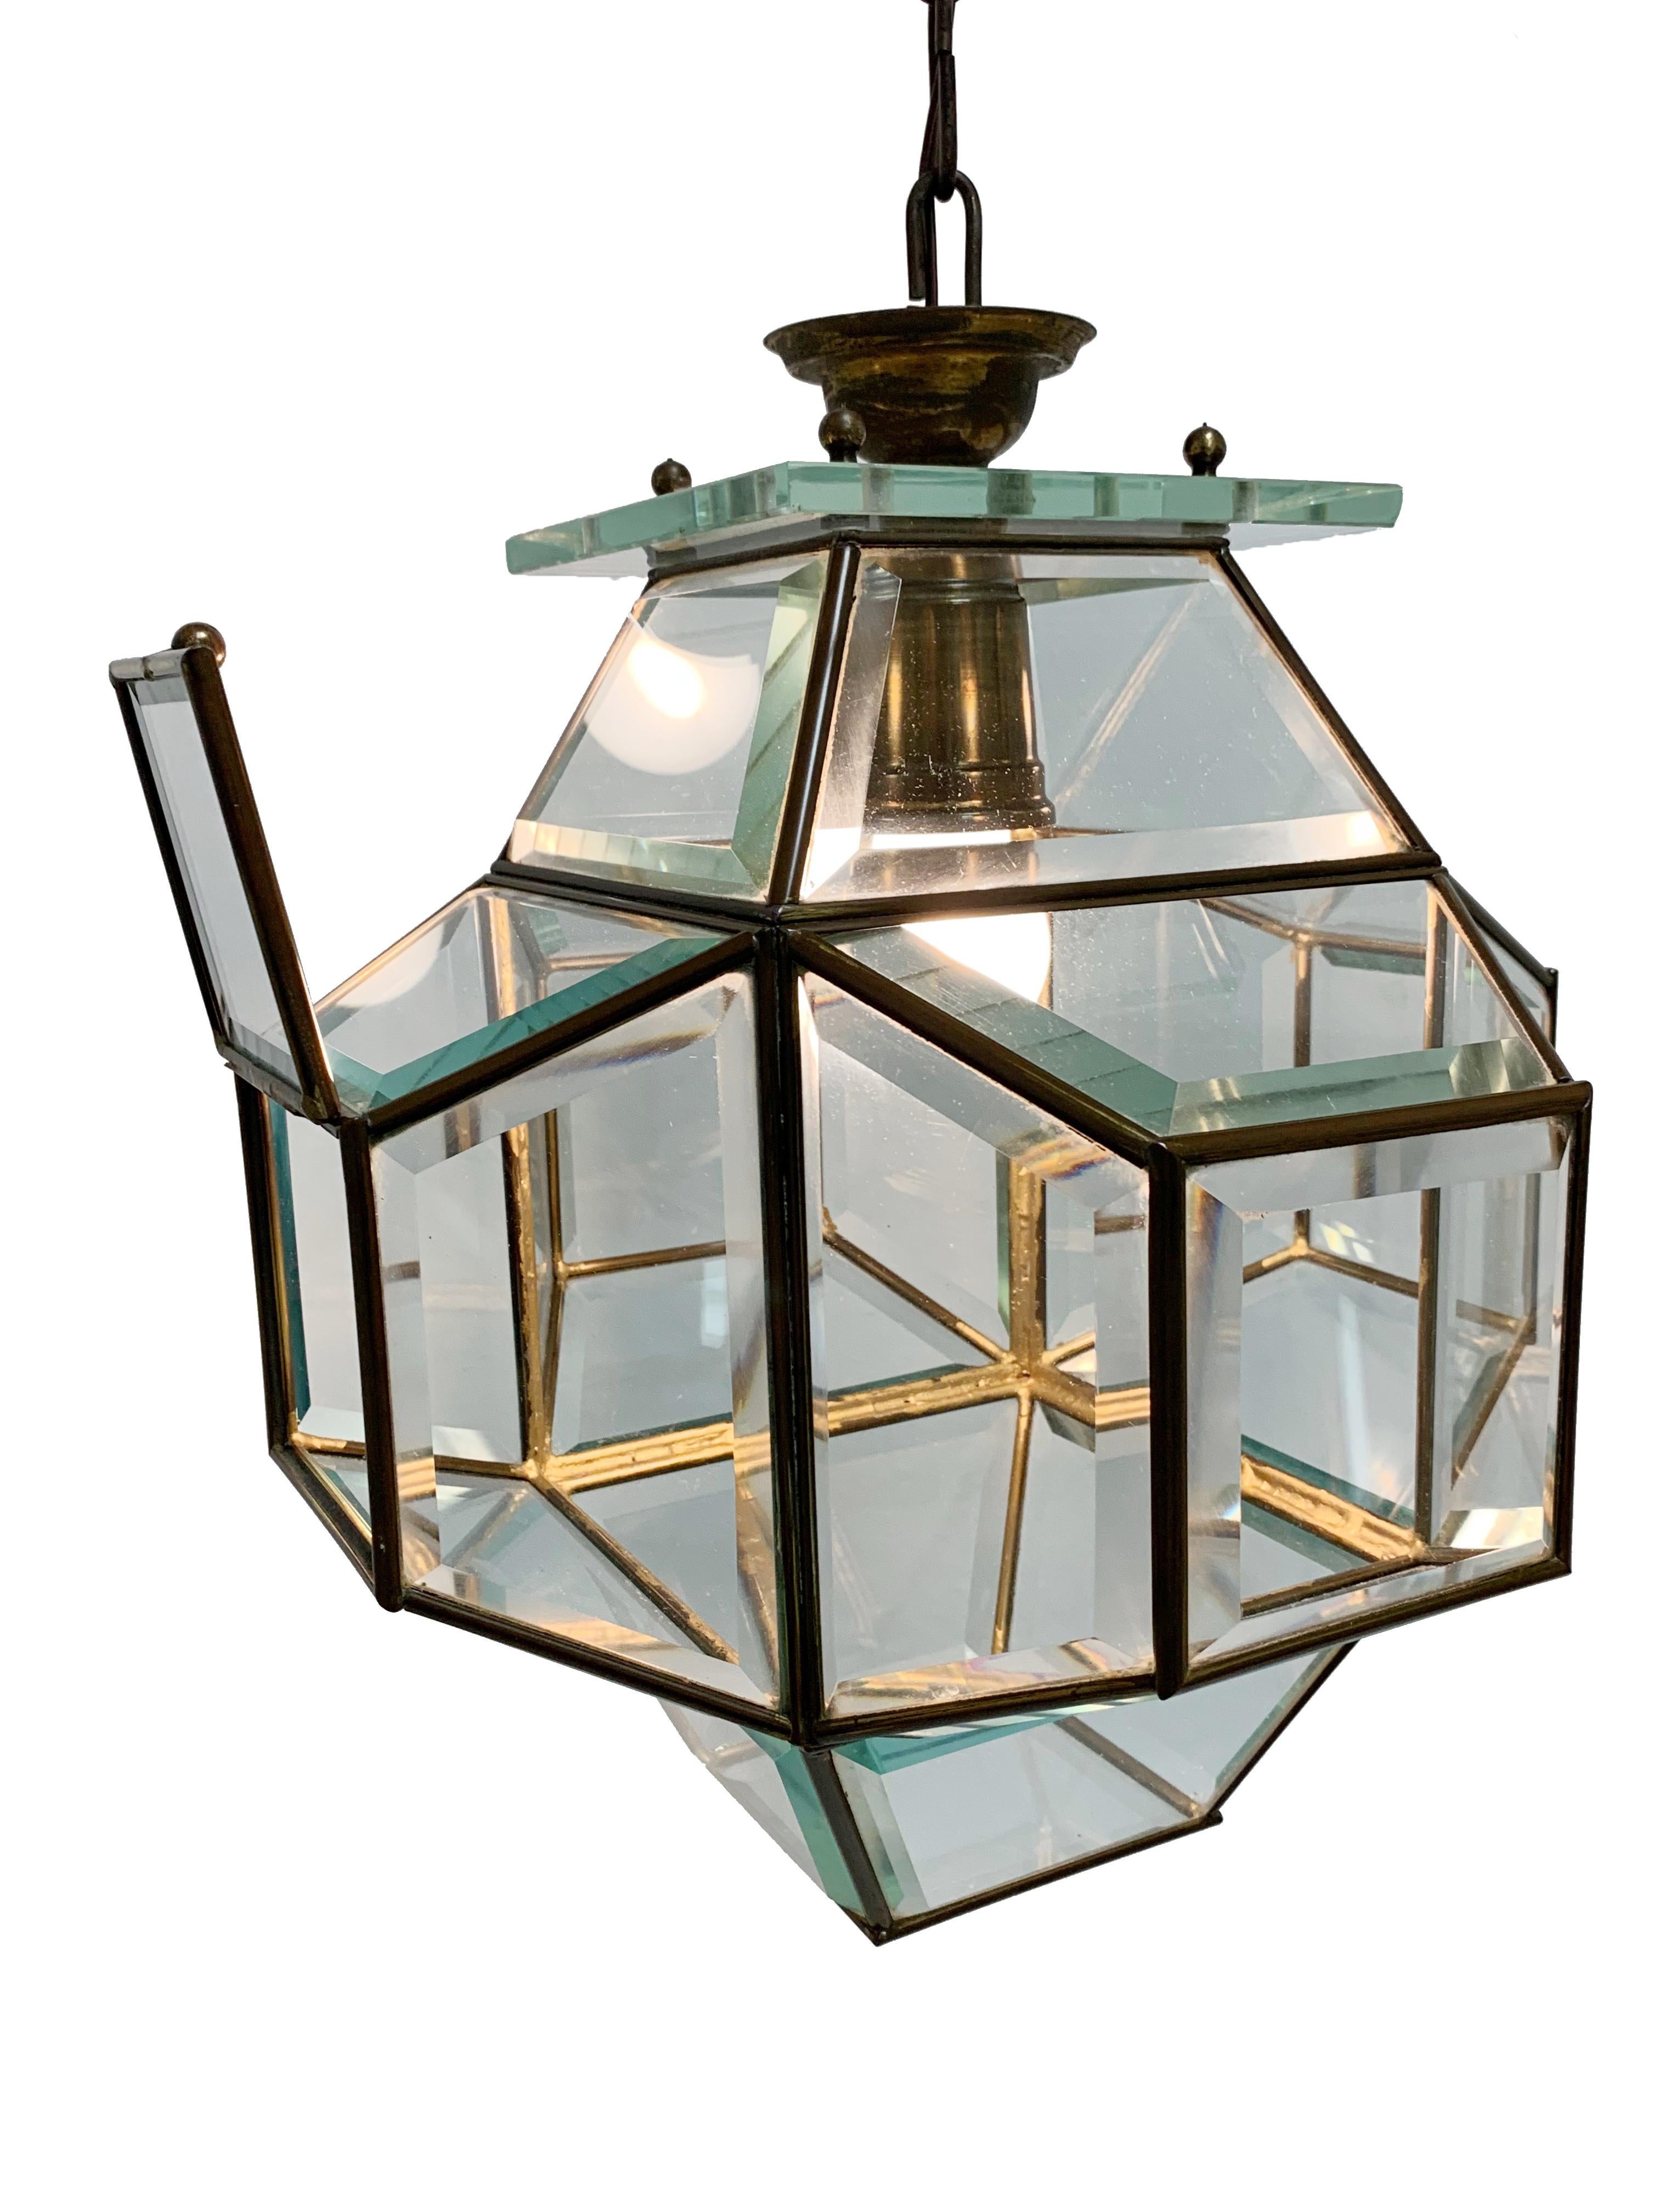 Glass and brass lantern from the 1950s attributed to Fontana Arte. Lighting of Italy
Particular and large lantern, composed of a brass frame with cut crystal glass, hanging from a thick square glass slab.
The glass is very often about 1